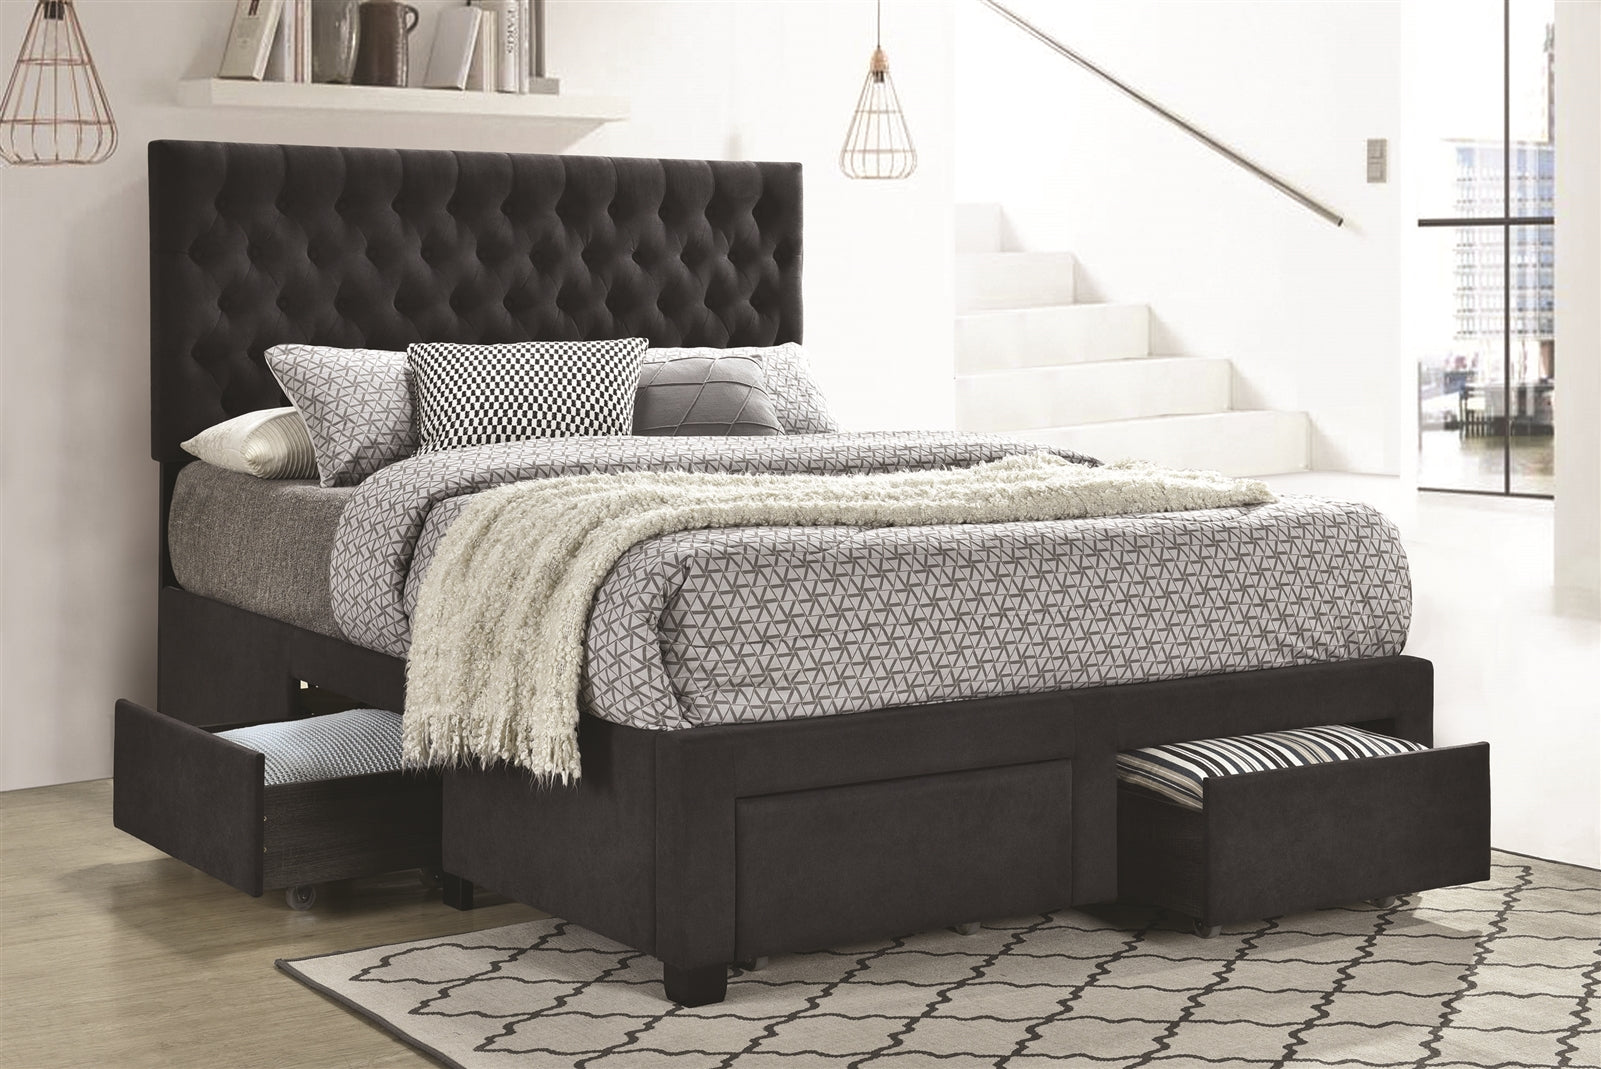 Lompoc Charcoal Upholstered Queen Storage Bed